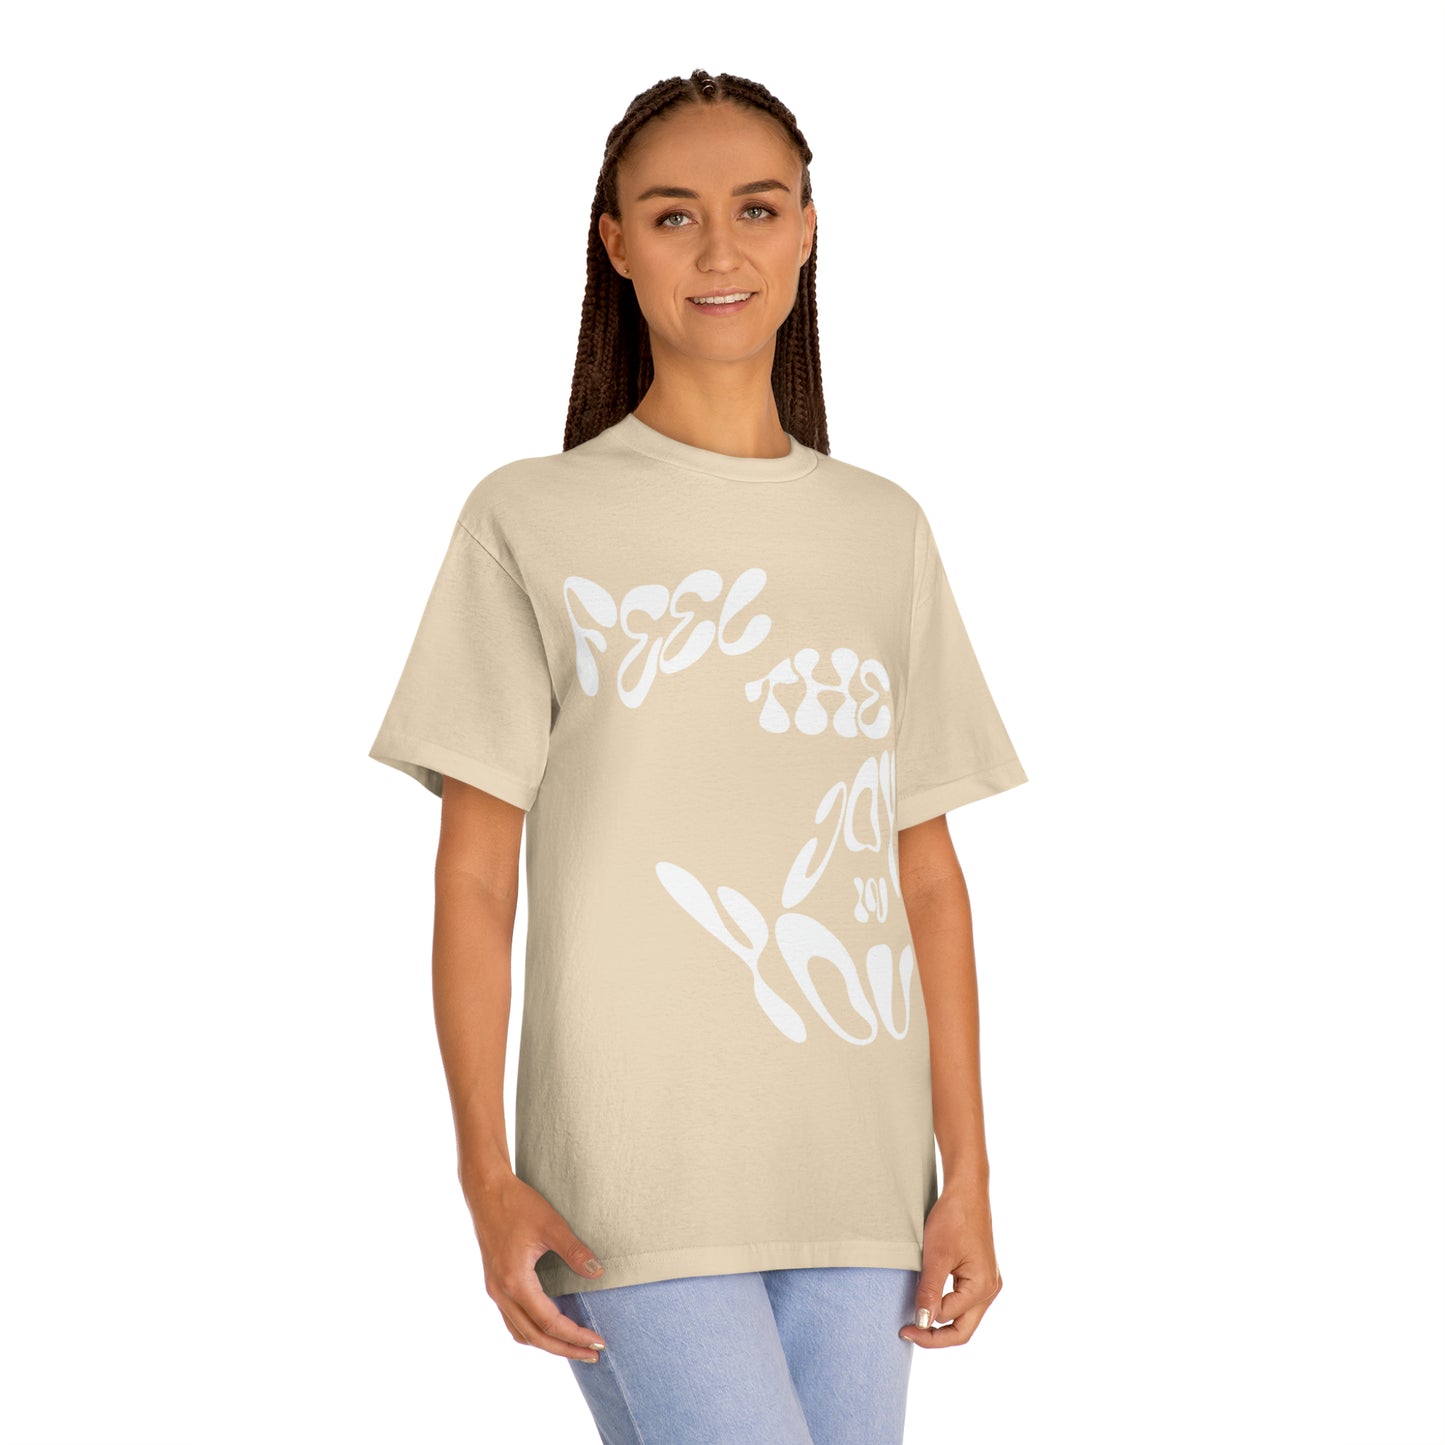 Fabulous Unisex Classic T-Shirt For All Occasions -Feel The Joy In You.